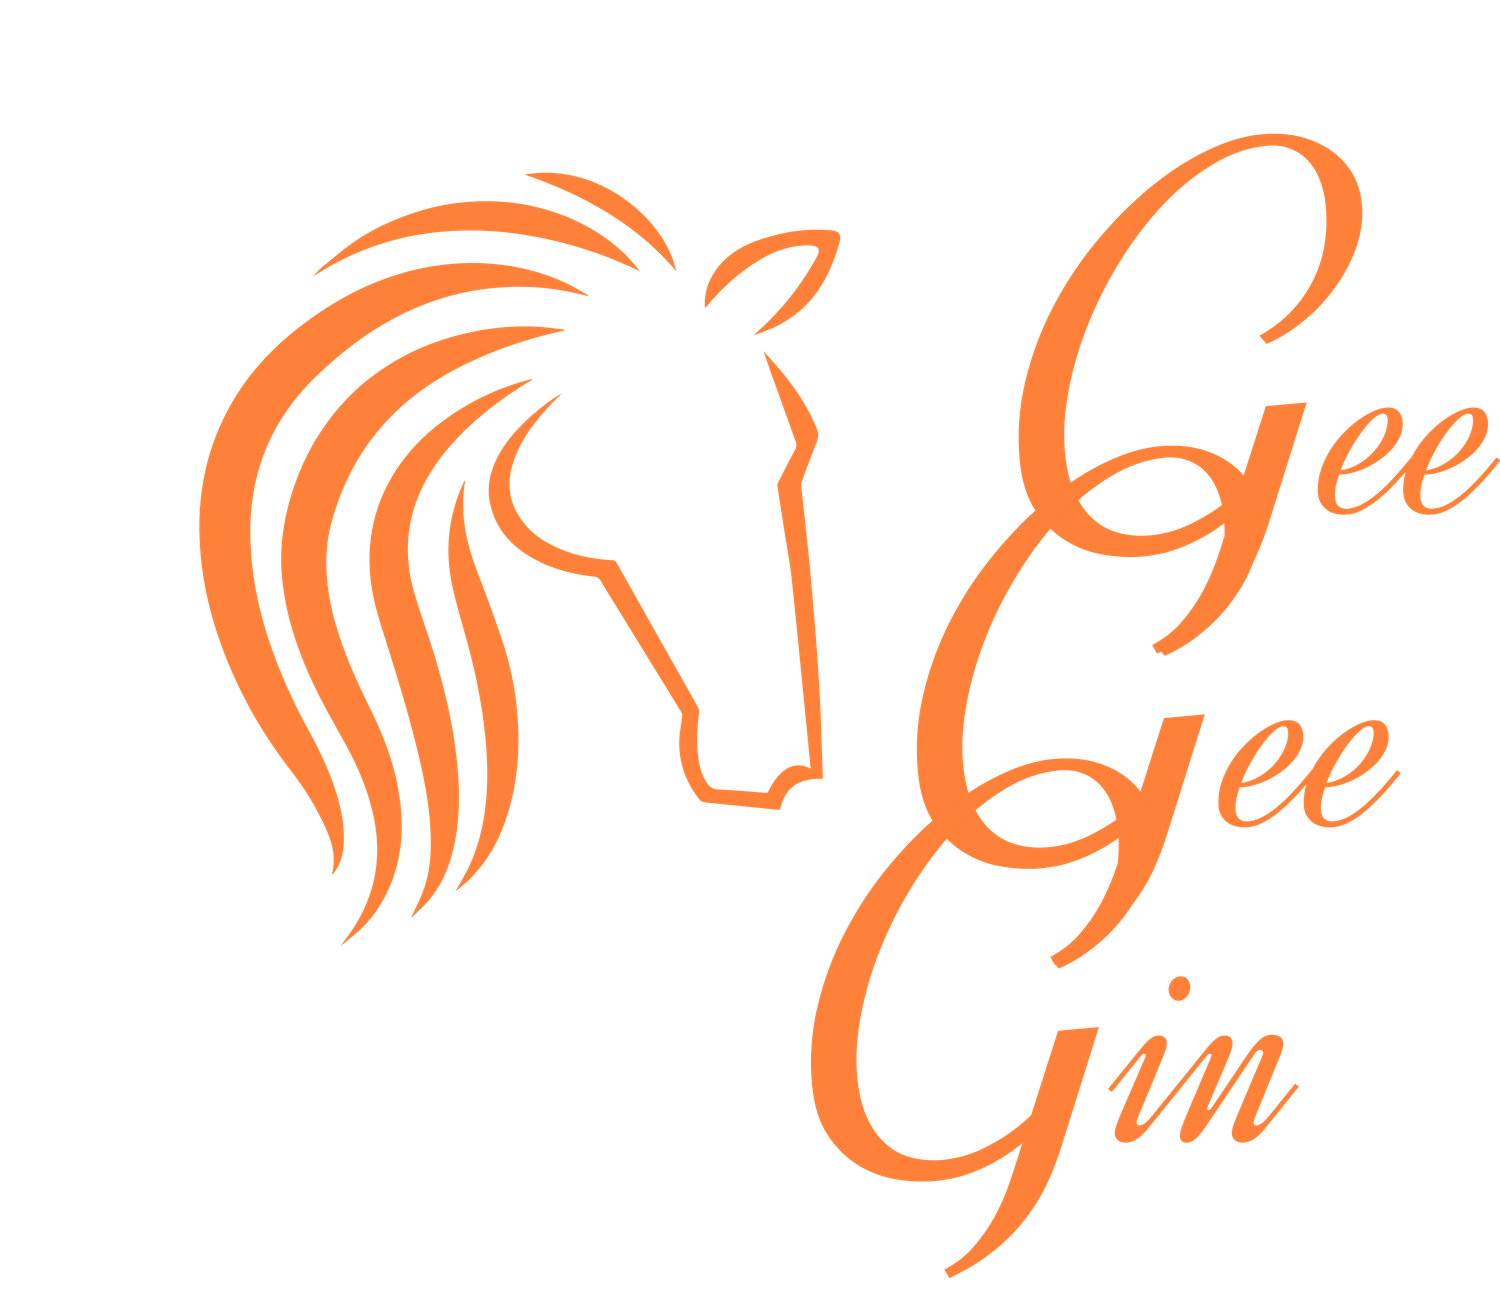 Gee Gee Gin and Vodka